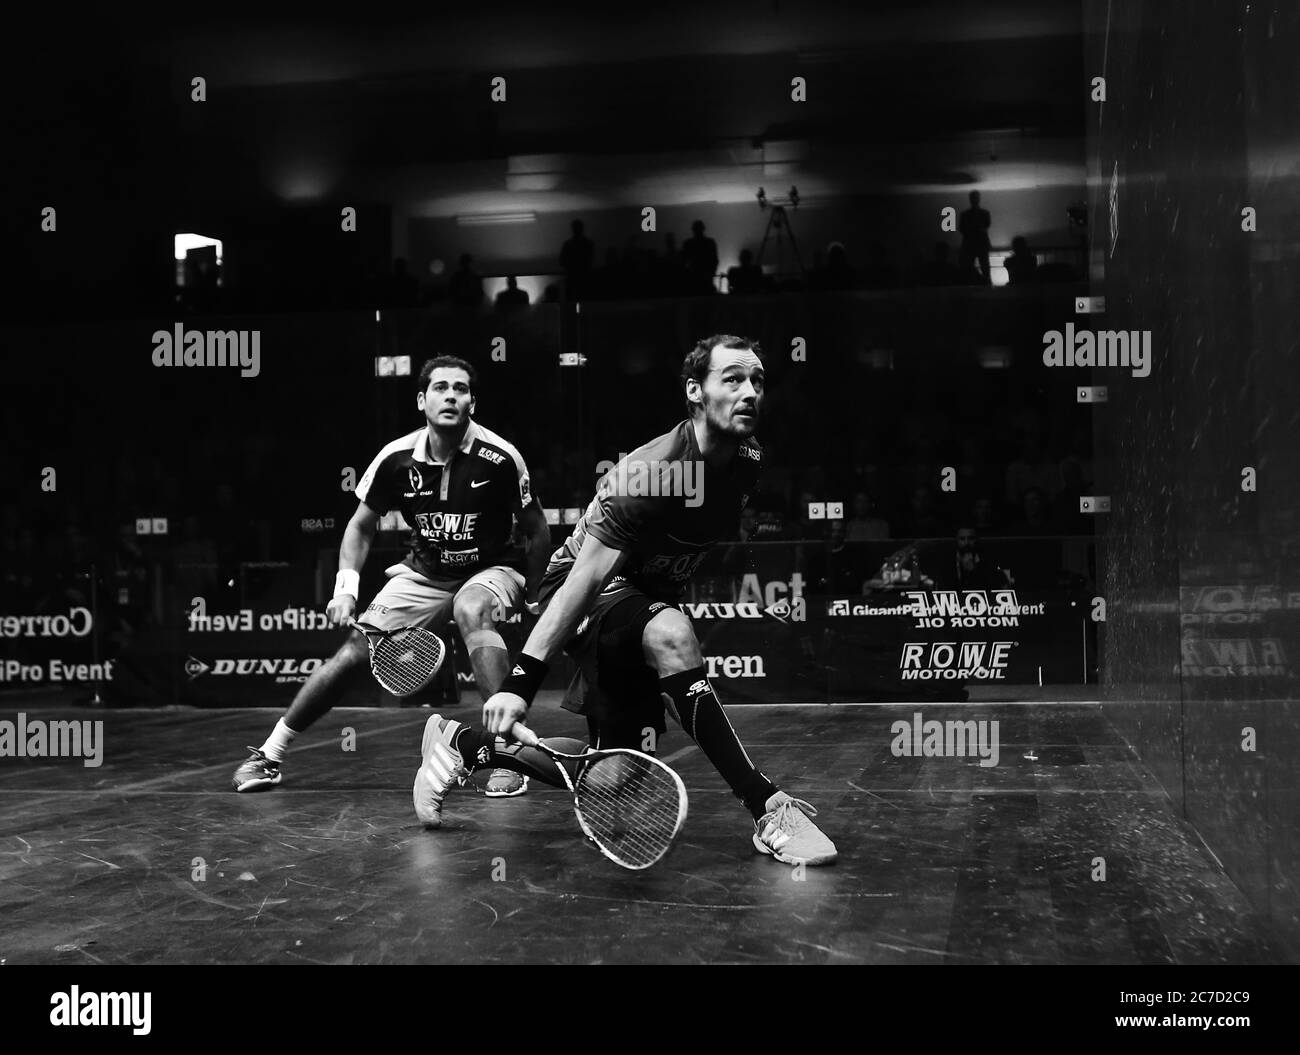 Linköping, Sweden 2017-02-05 Gregory Gaultier (right) took his third title in the Swedish open on Sunday. It was a 3-1 victory in the prestigious meeting with Karim Abdel Gawad in the final. Photo Jeppe Gustafsson Stock Photo